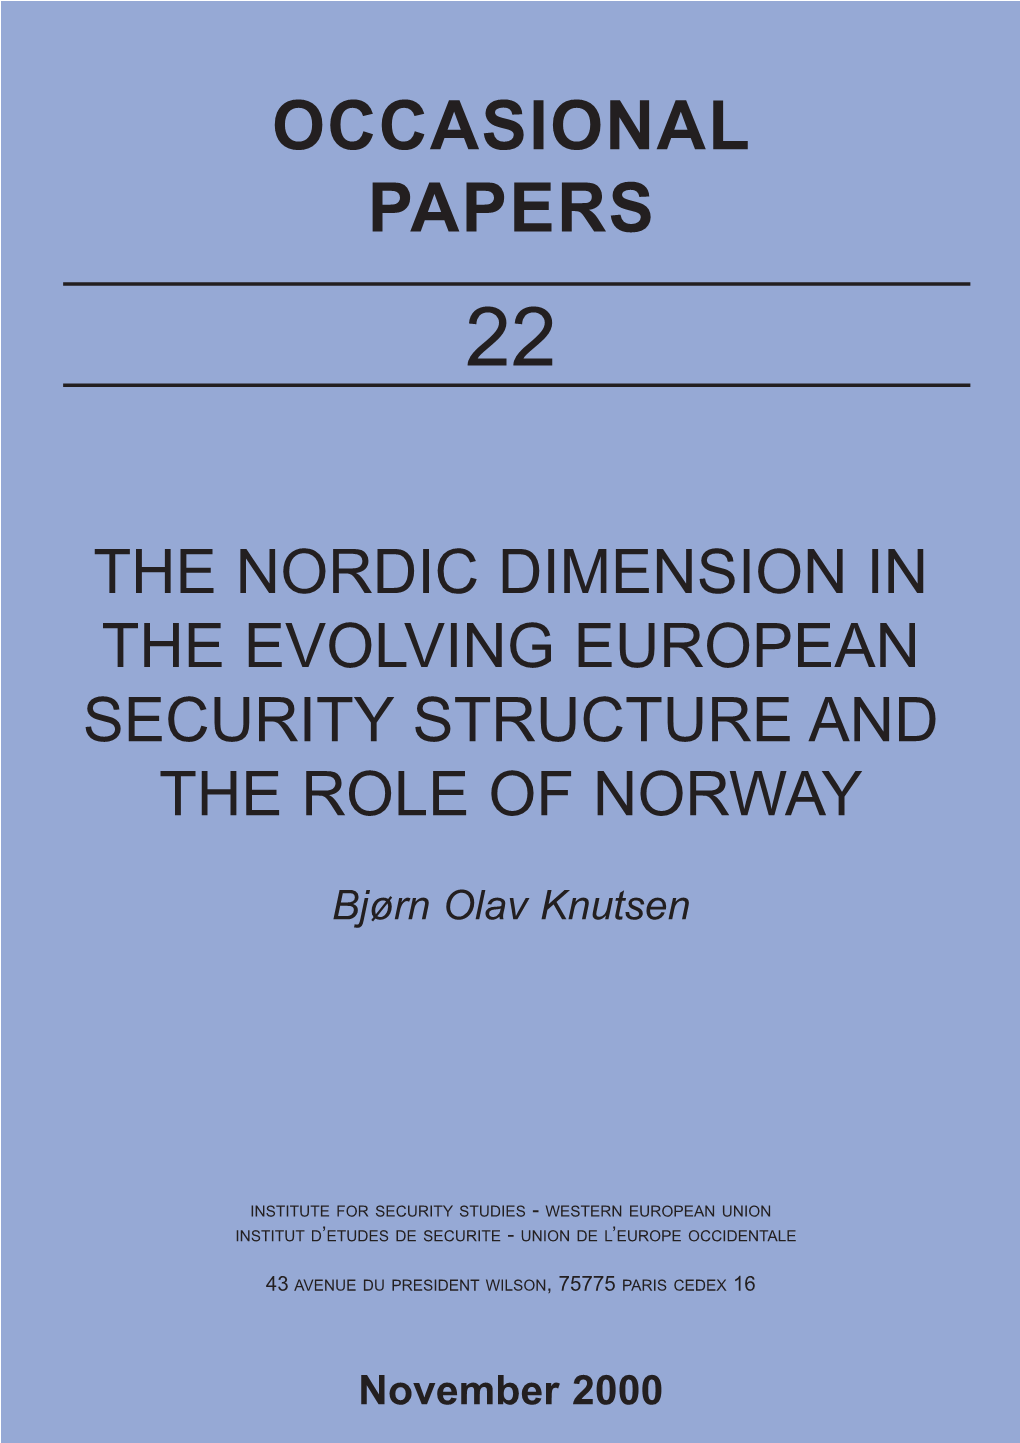 The Nordic Dimension in the Evolving European Security Structure and the Role of Norway